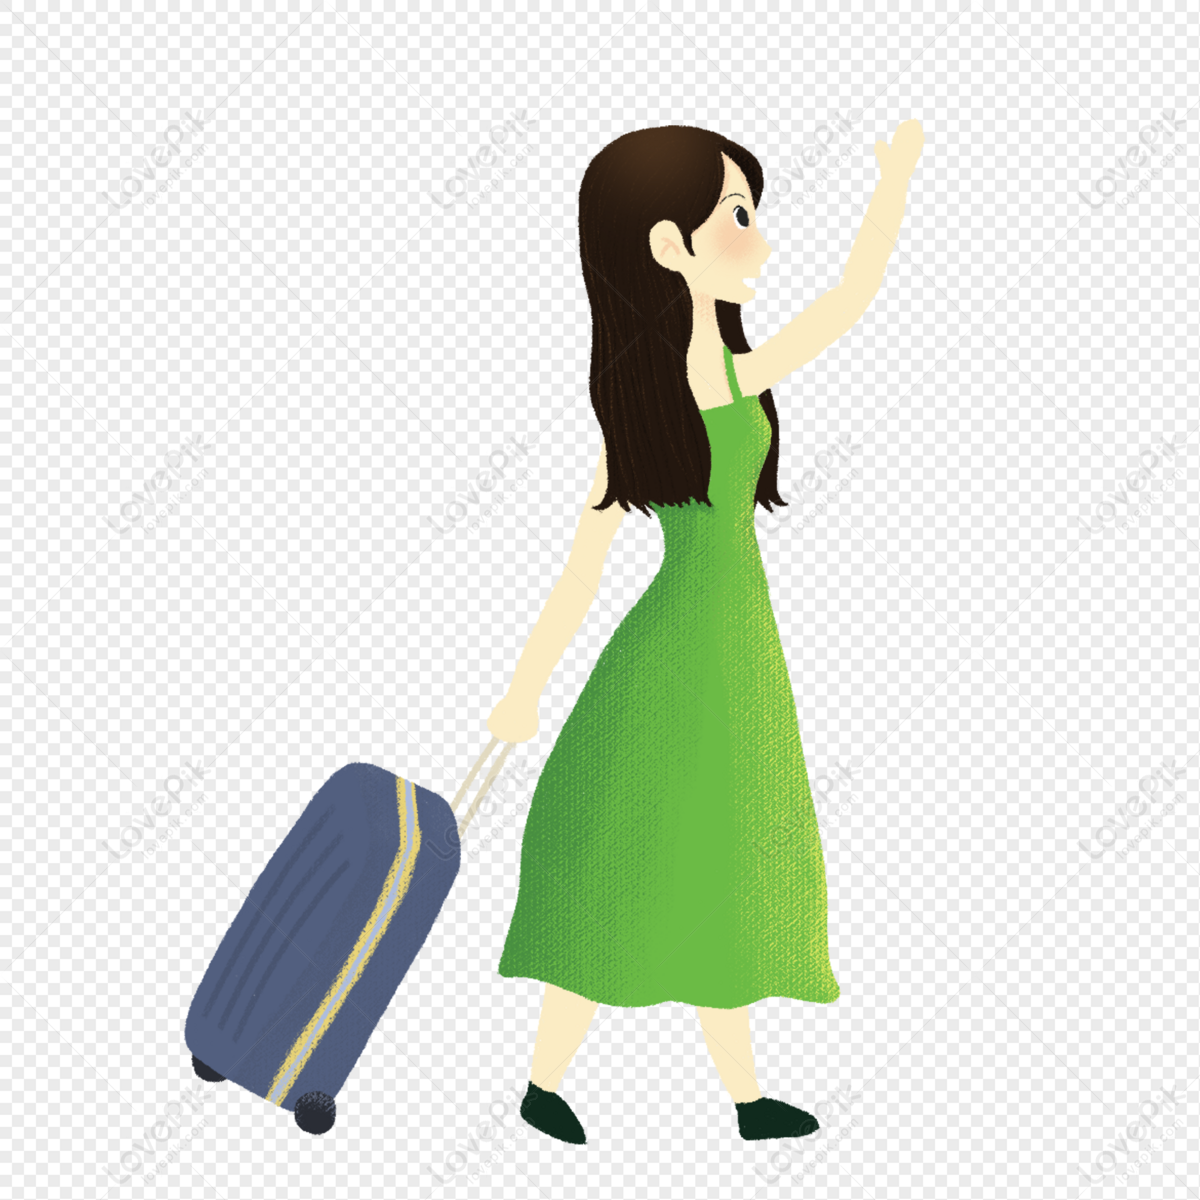 Vacation tourist girl, tourist girl, tourist vacation, vacation girl png image free download